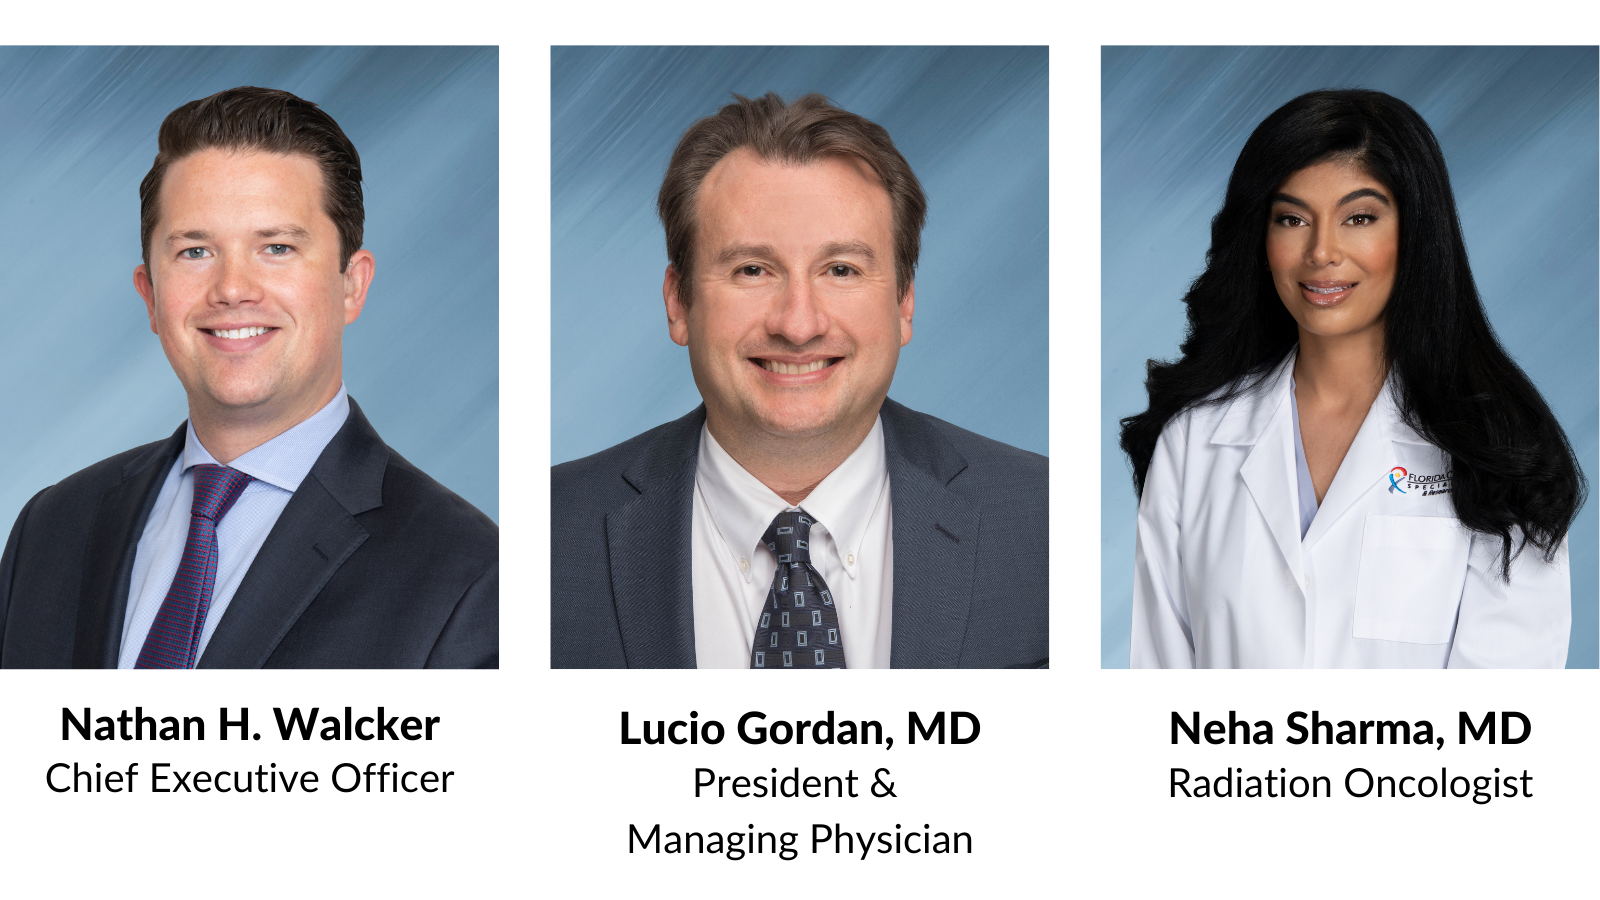 Chief Executive Officer Nathan H. Walcker; President & Managing Physician Lucio Gordan, MD; Radiation Oncologist Neha Sharma, MD